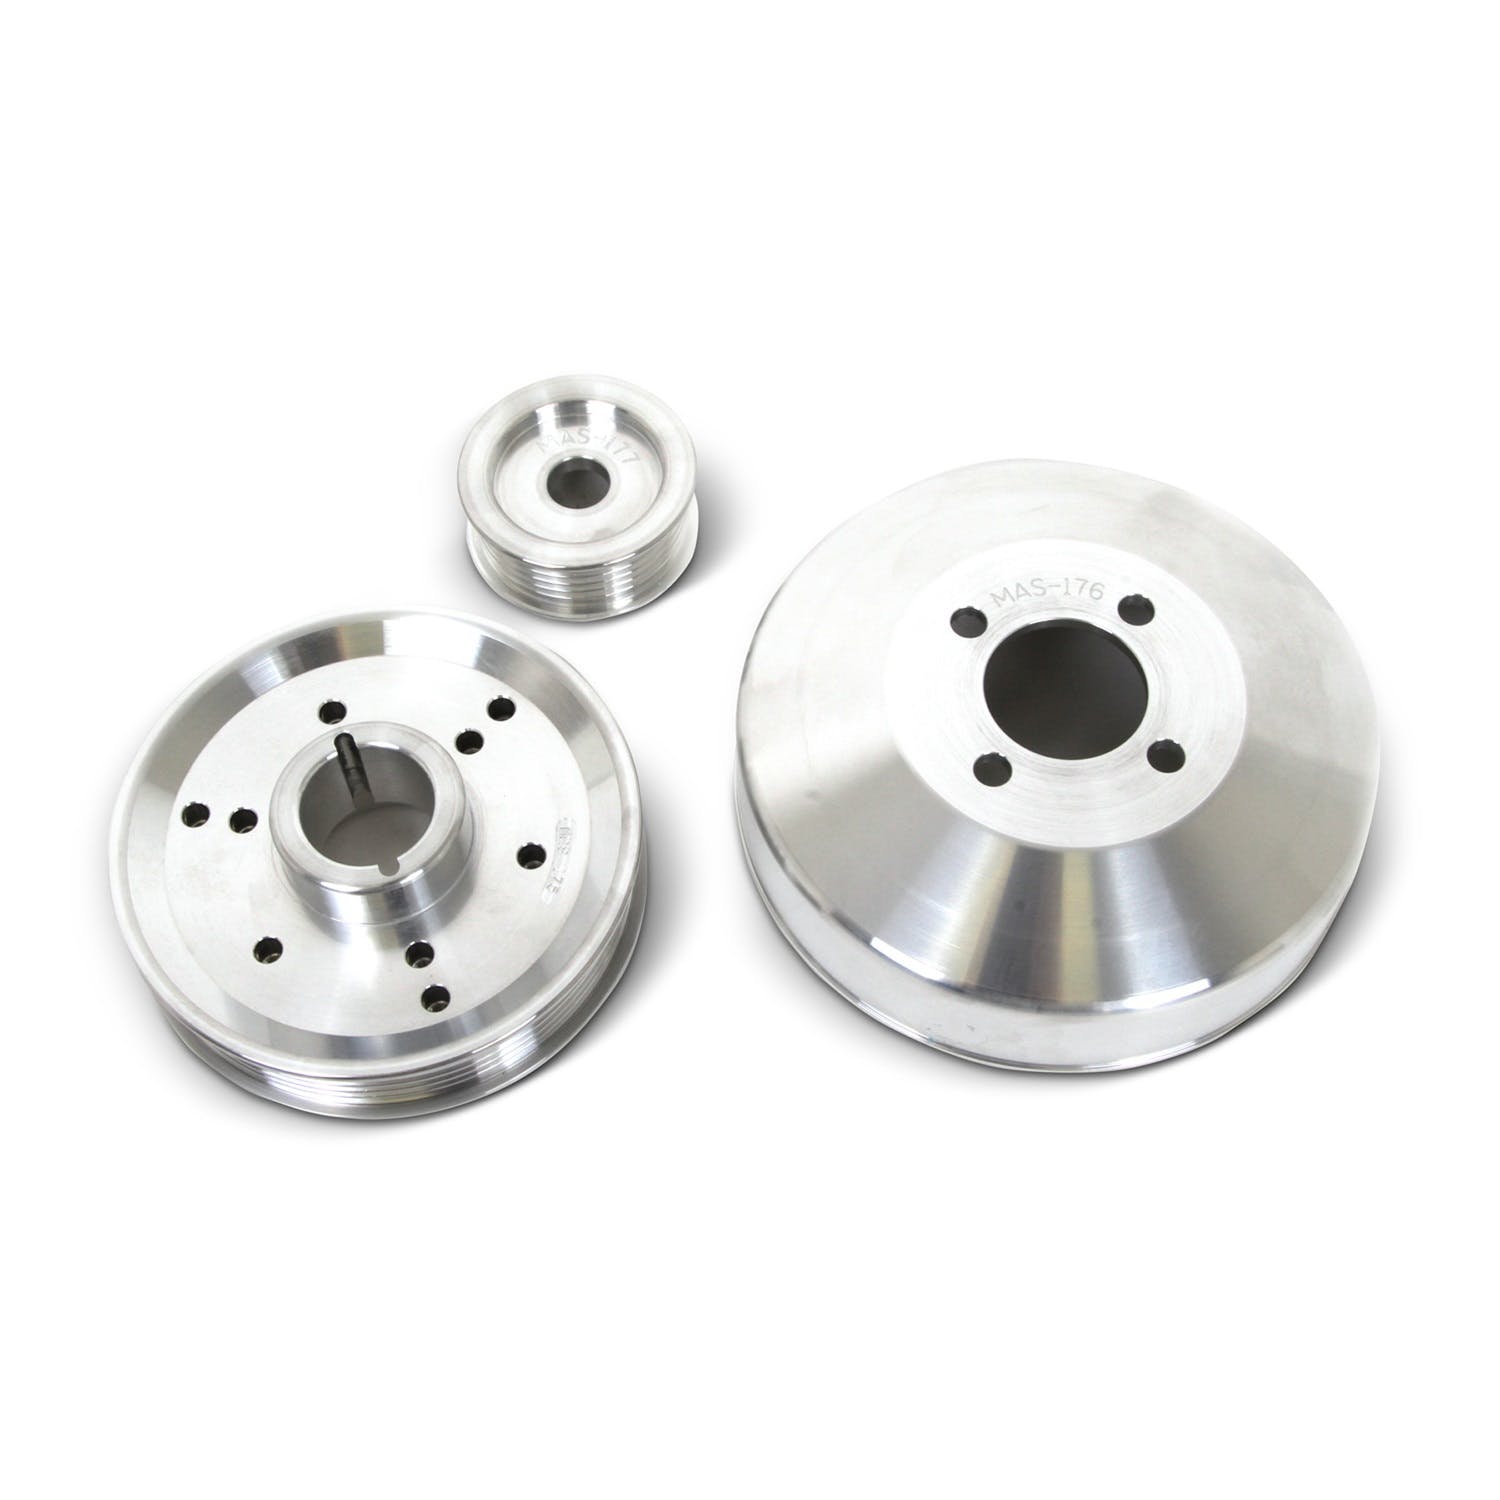 BBK Performance Parts 1555 Power-Plus Series Underdrive Pulley System